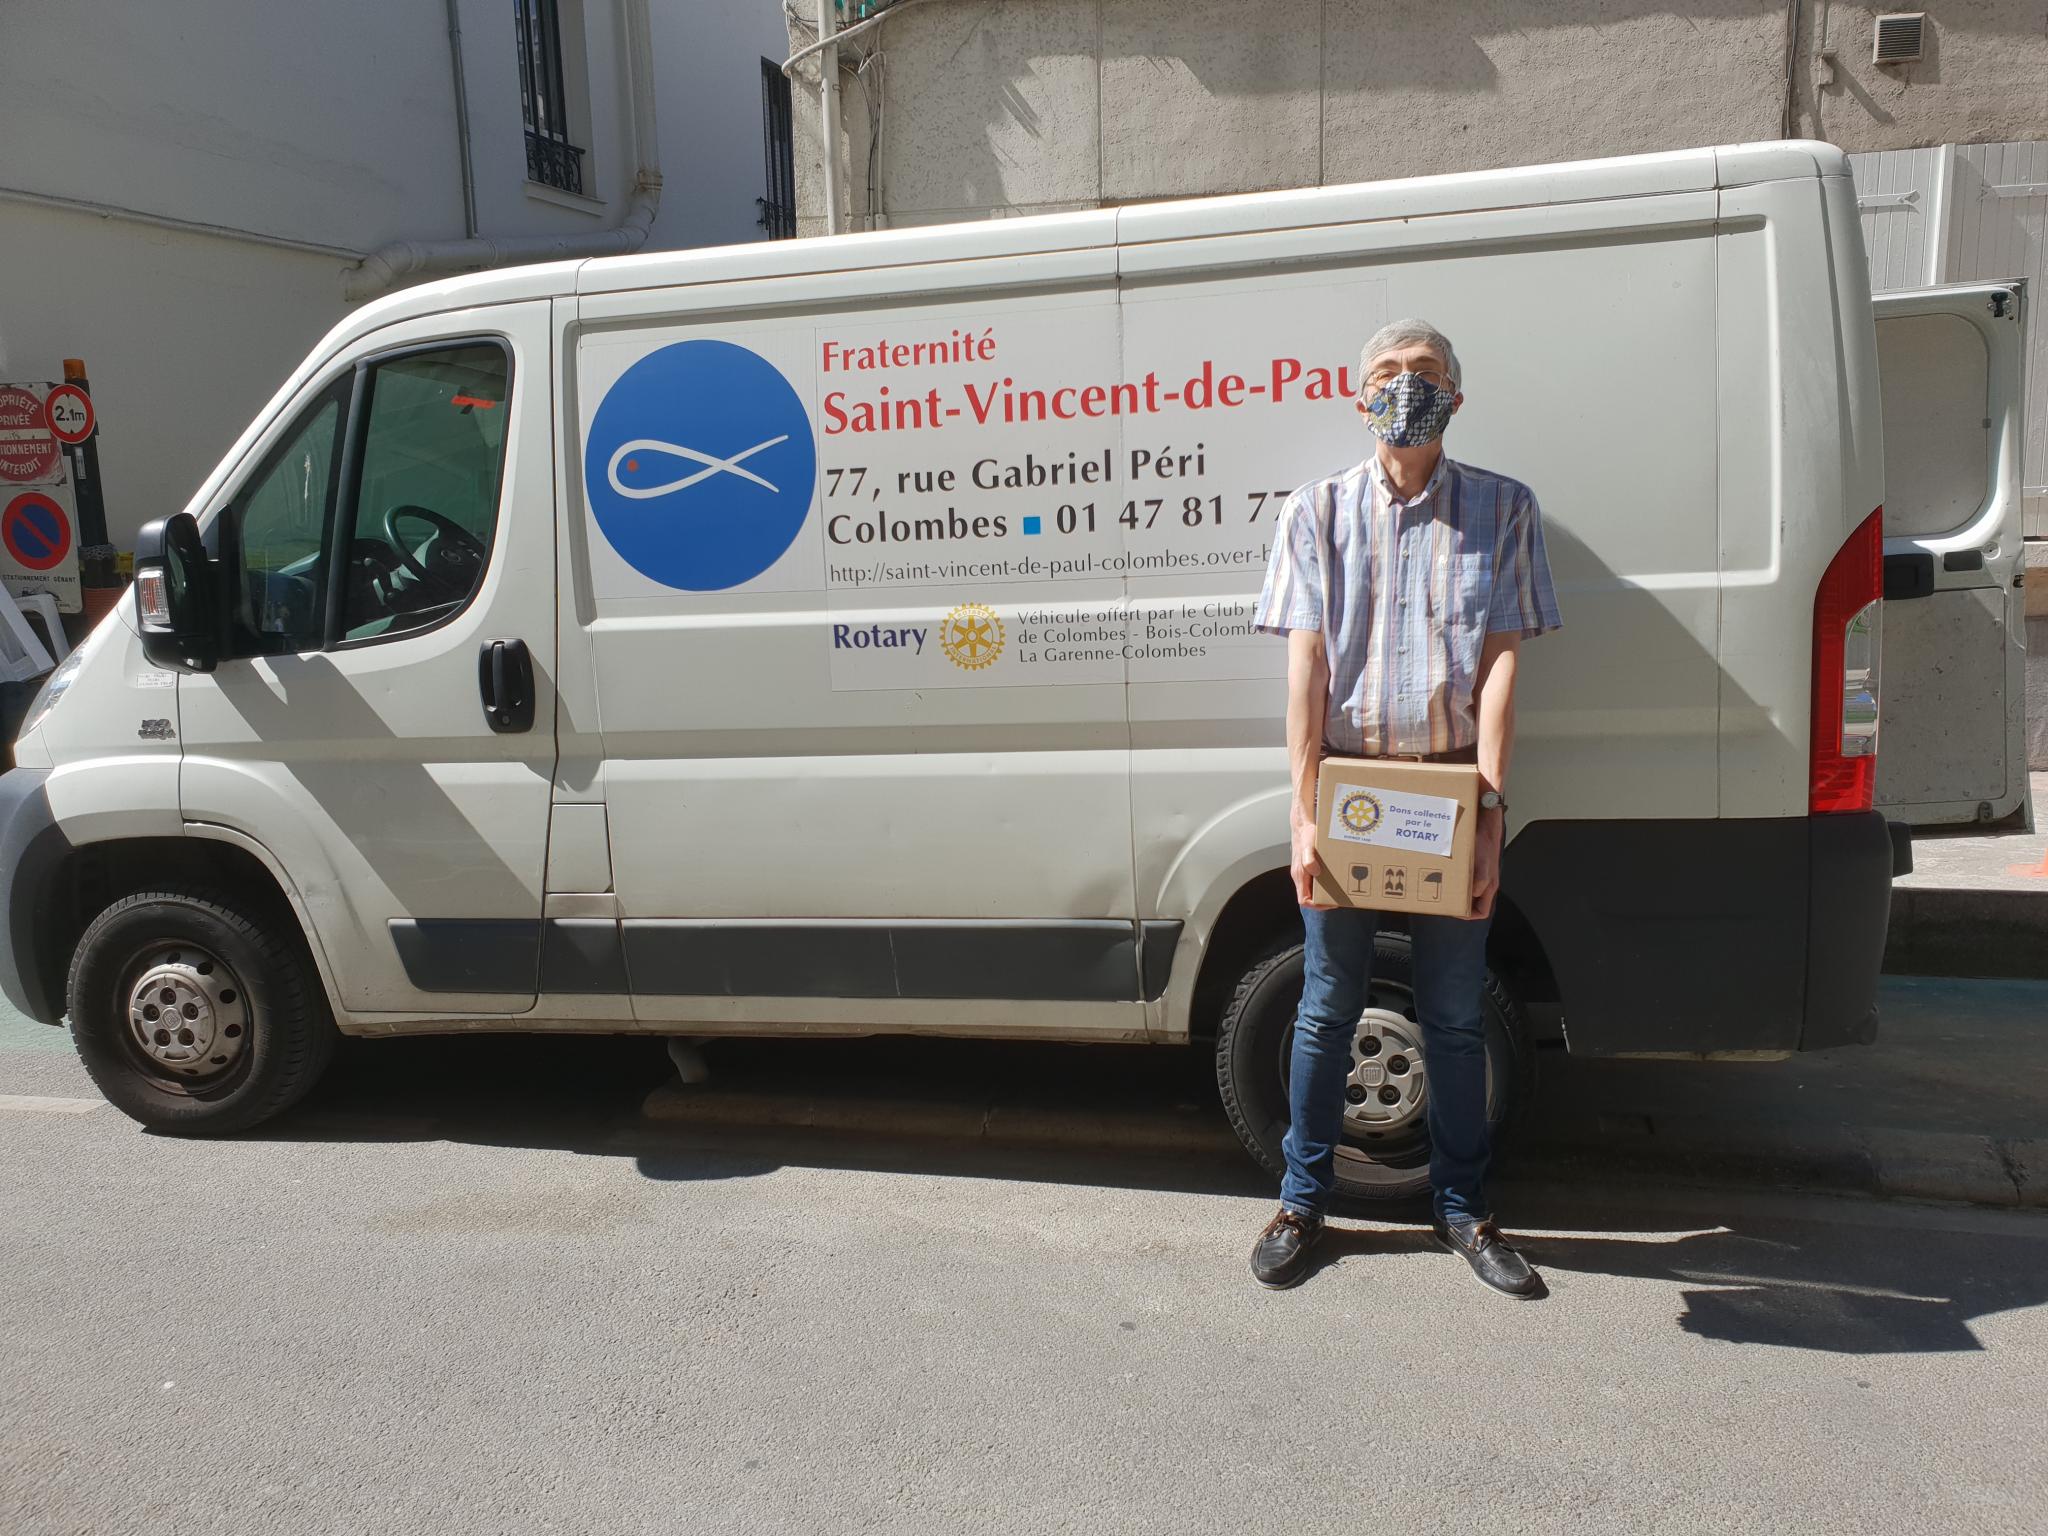 Photo camion epicerie solidaire